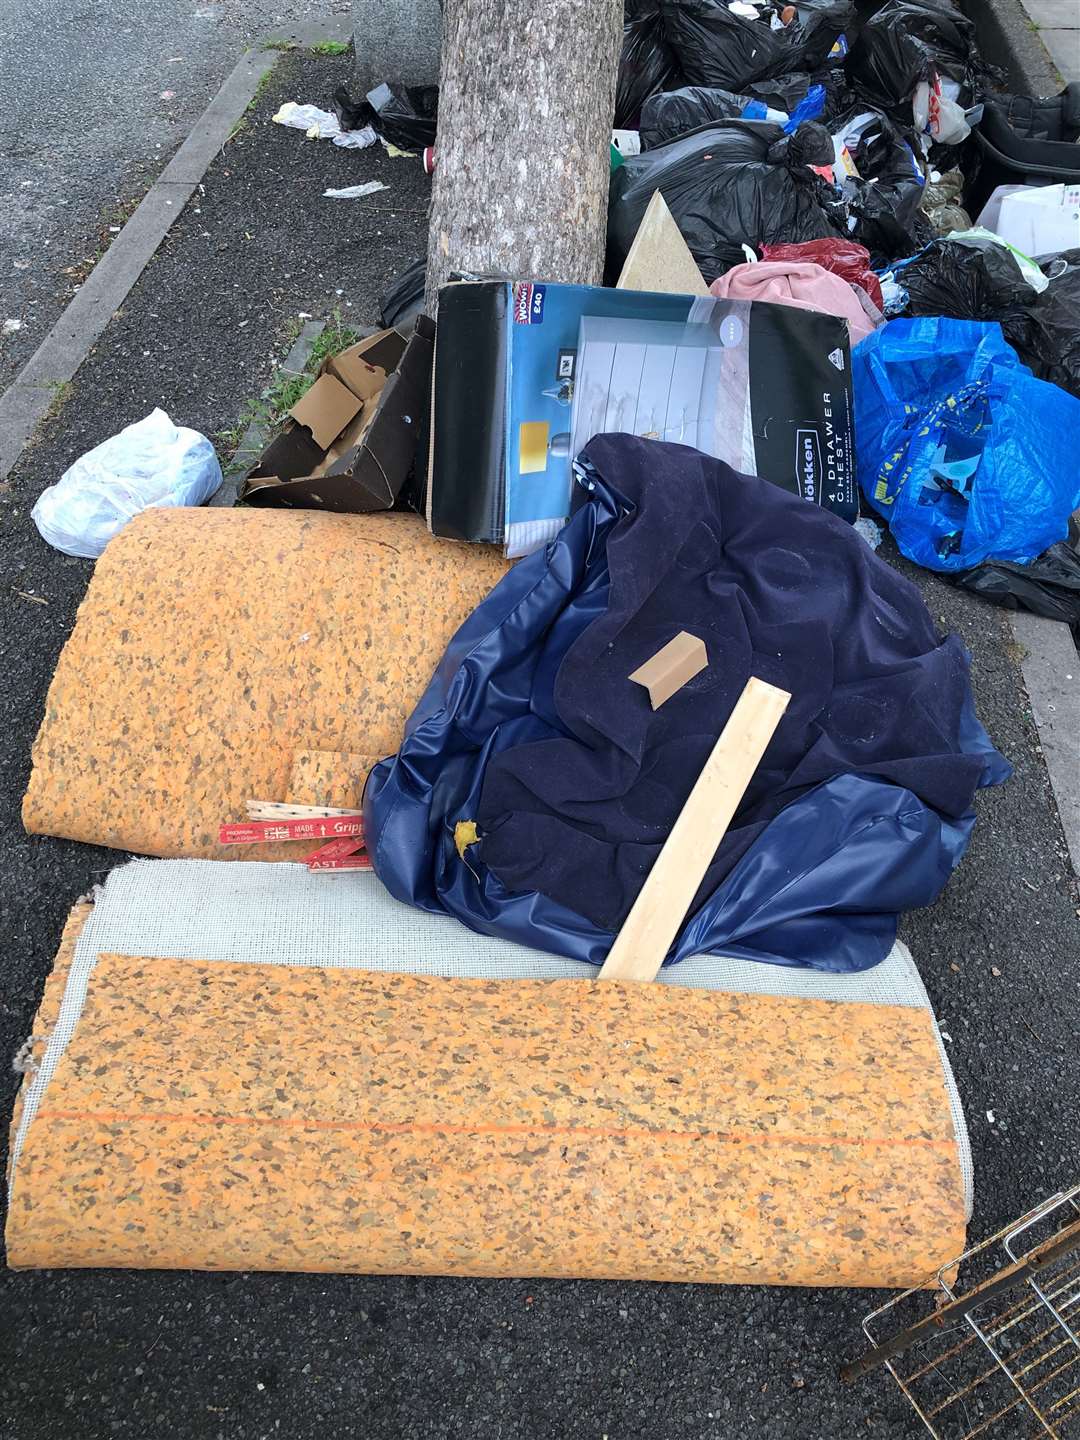 Jan Balog has been ordered to pay more than £2,000 after dodging the original fly-tipping fine of £400. Picture: Gravesham Borough Council